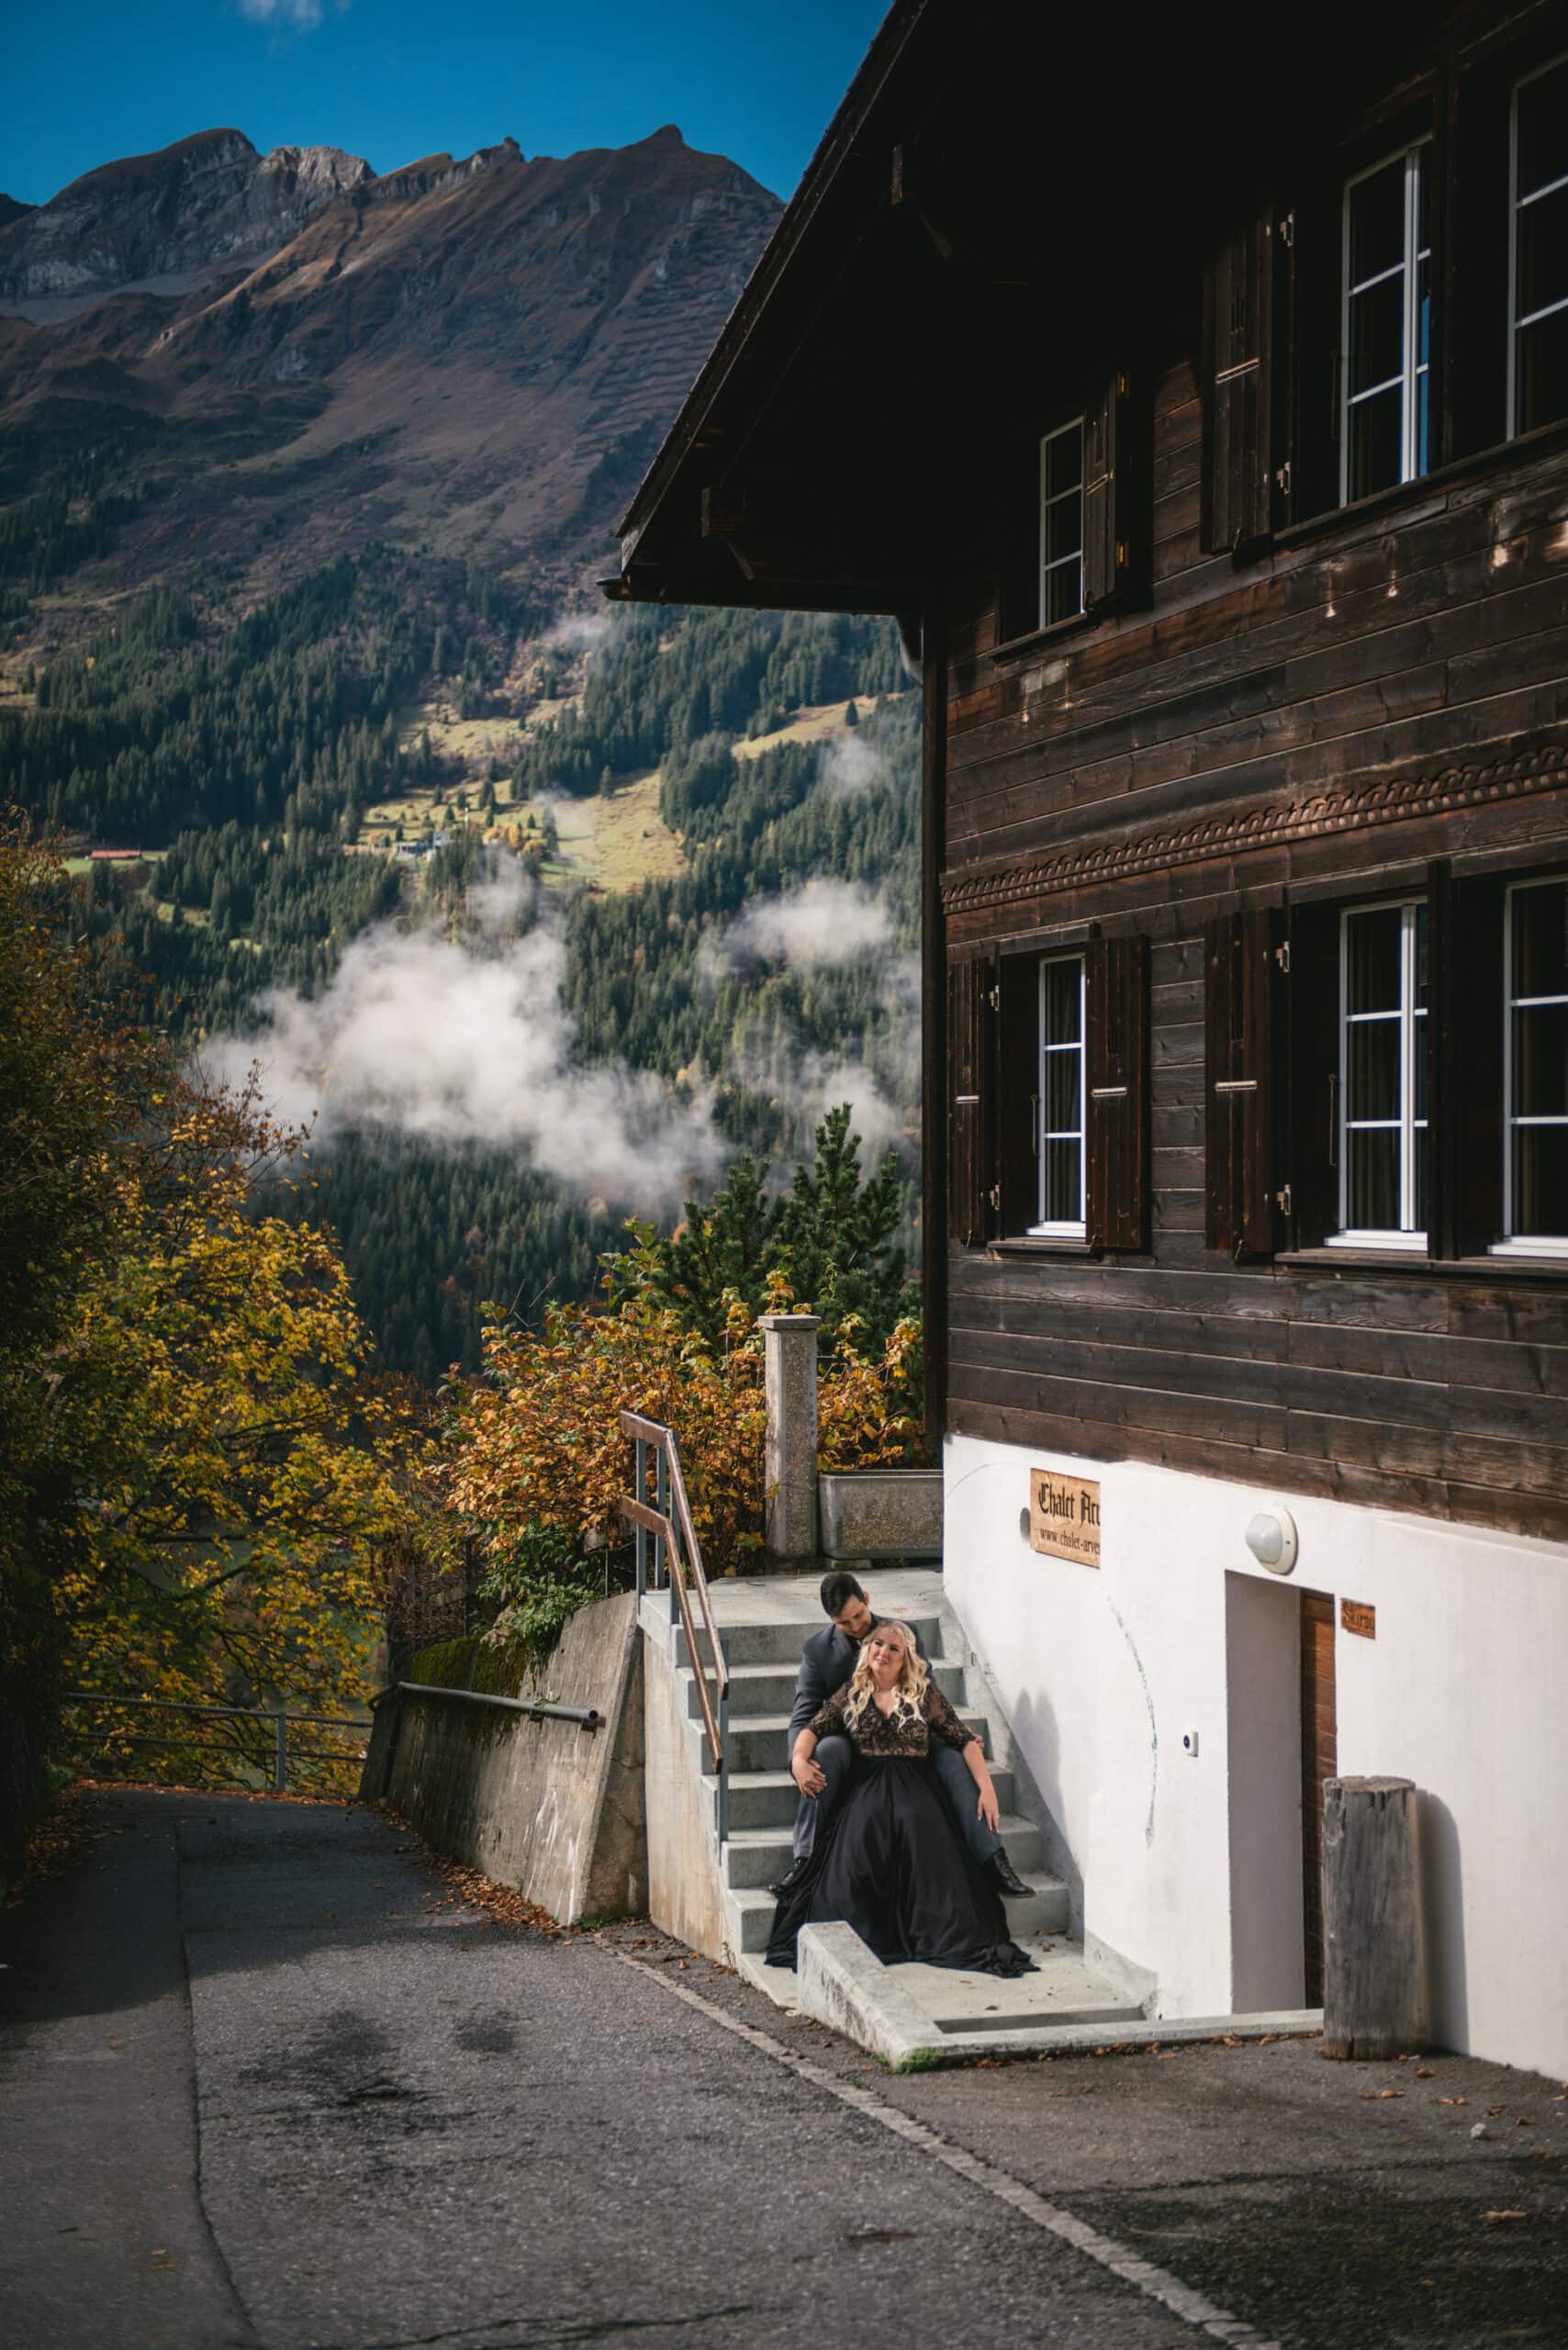 Couple cuddling with the Lauterbrunnen valley in the background